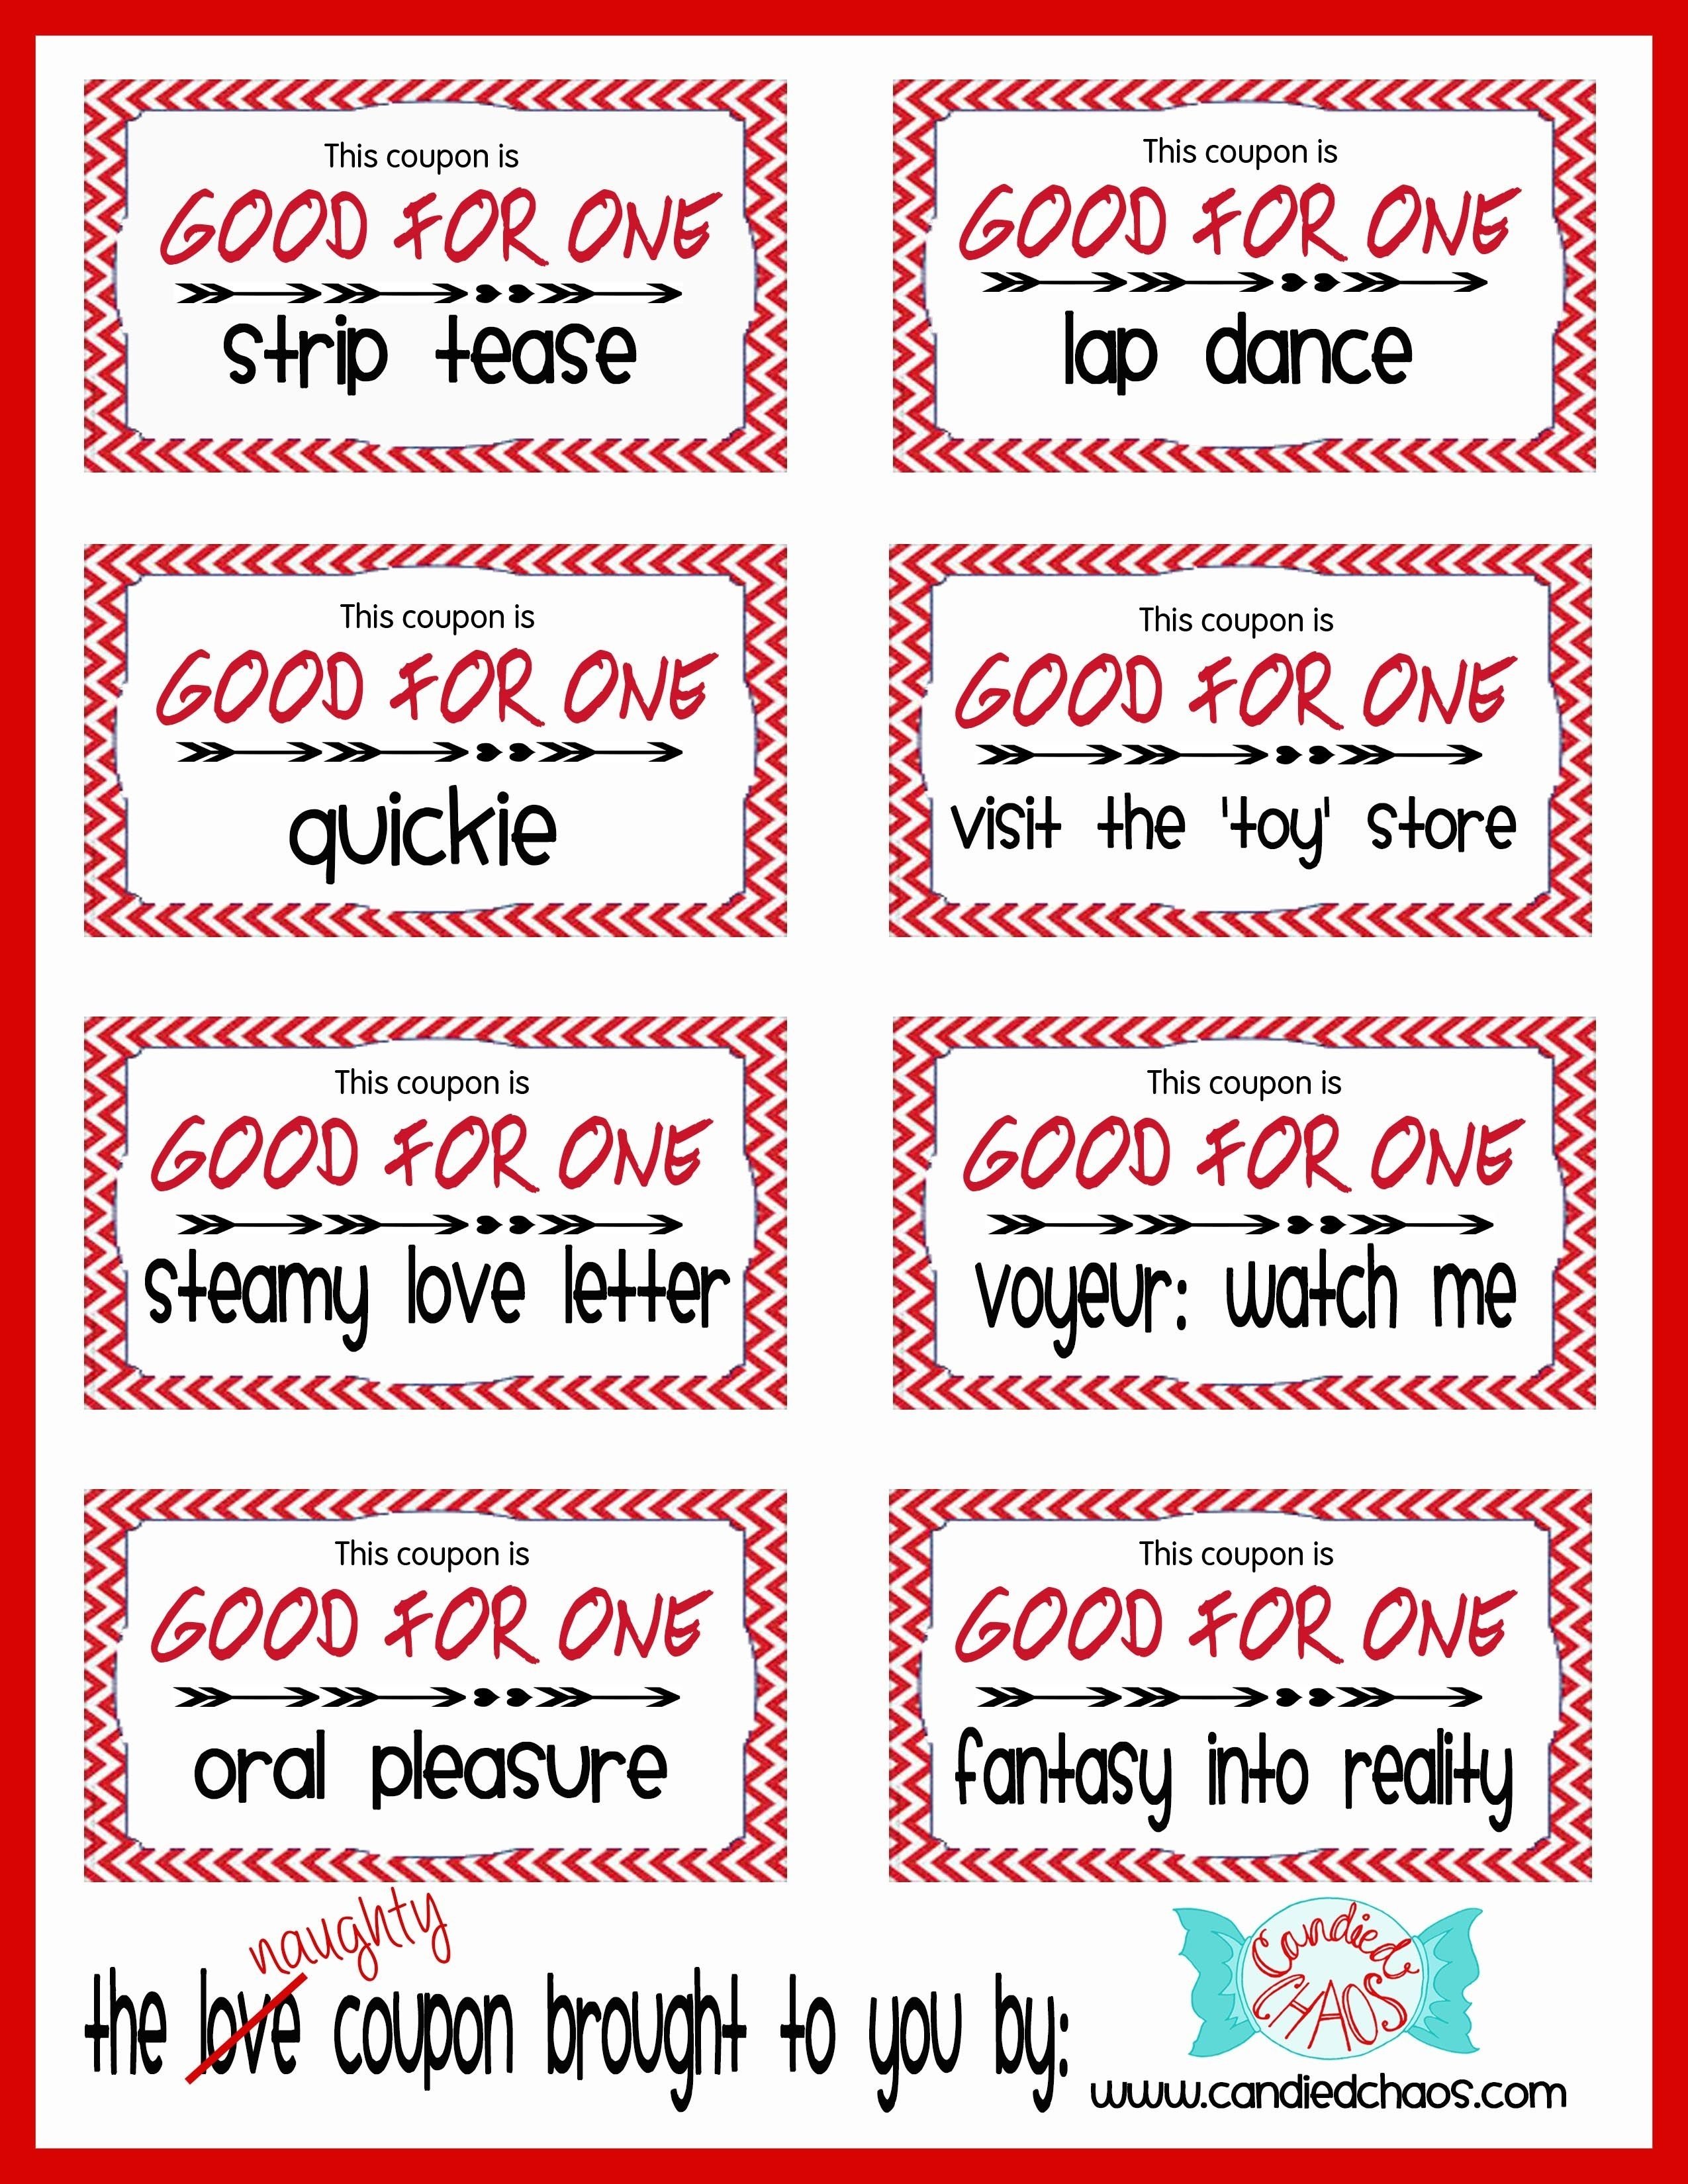 10 Beautiful Naughty Coupon Ideas For Boyfriend naughty coupons love this idea valentines pinterest coupons 8 2022